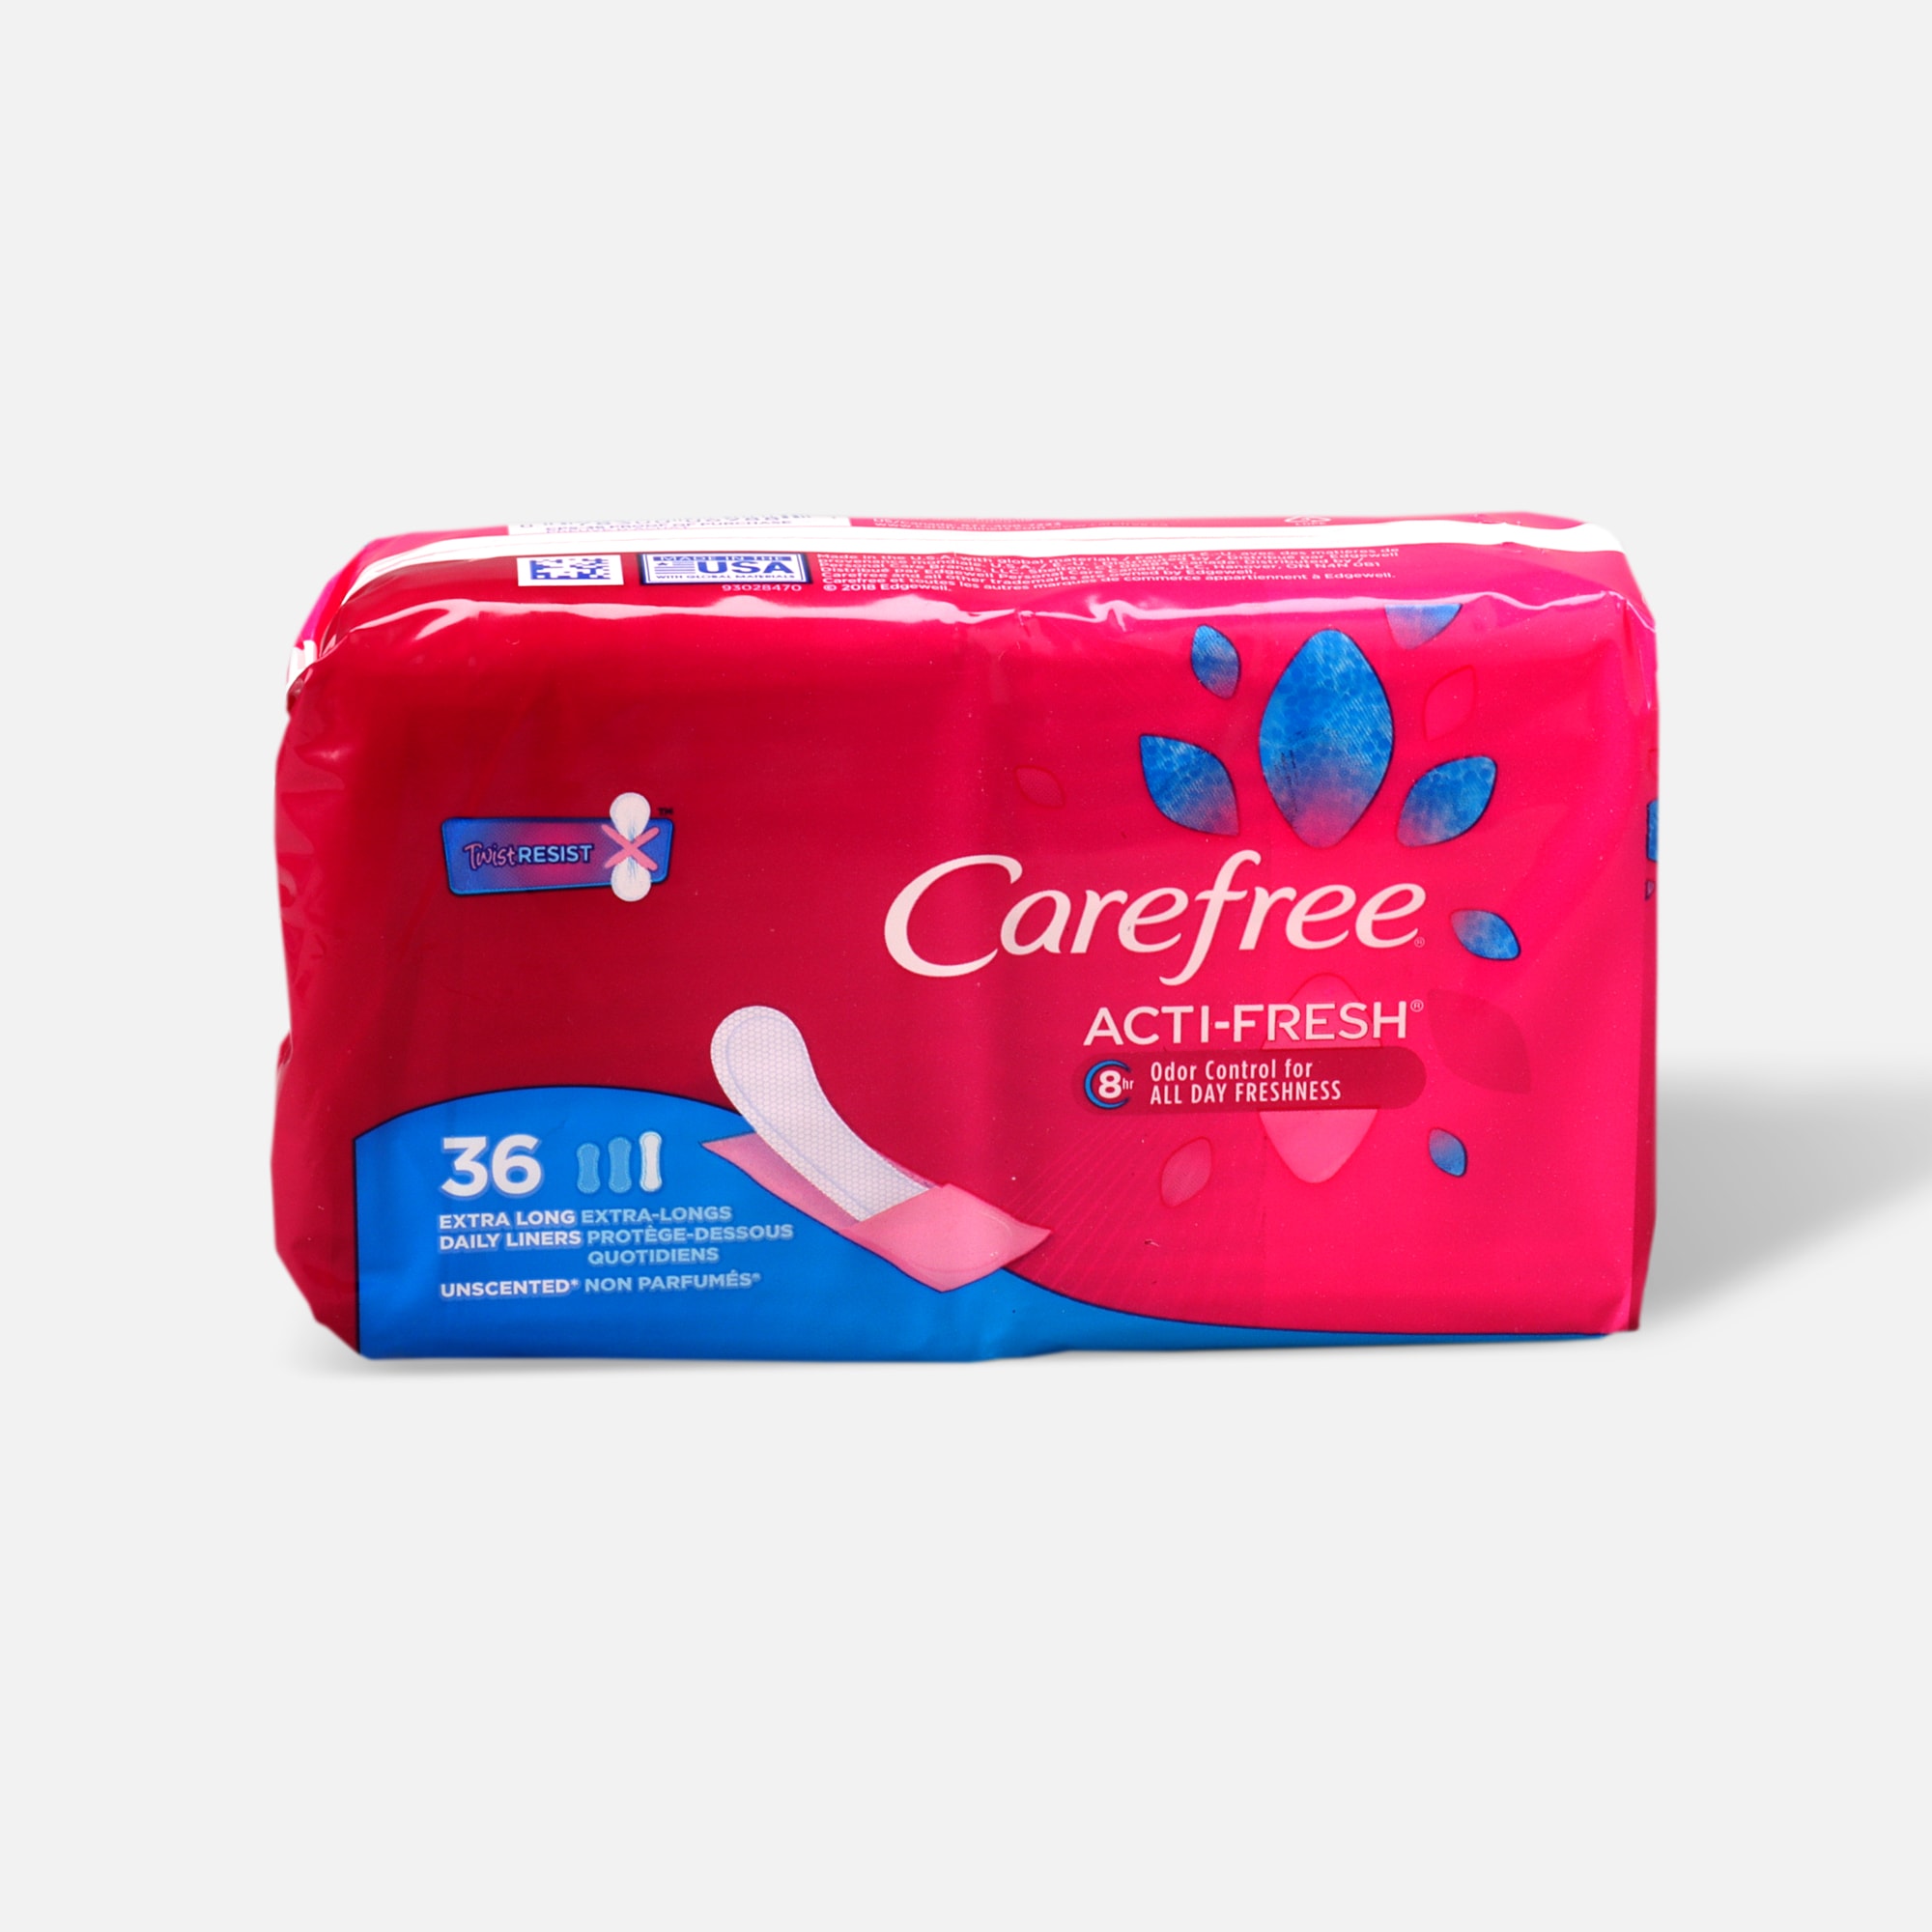 CAREFREE Acti-fresh Body Shape Extra Long to Go Unscented